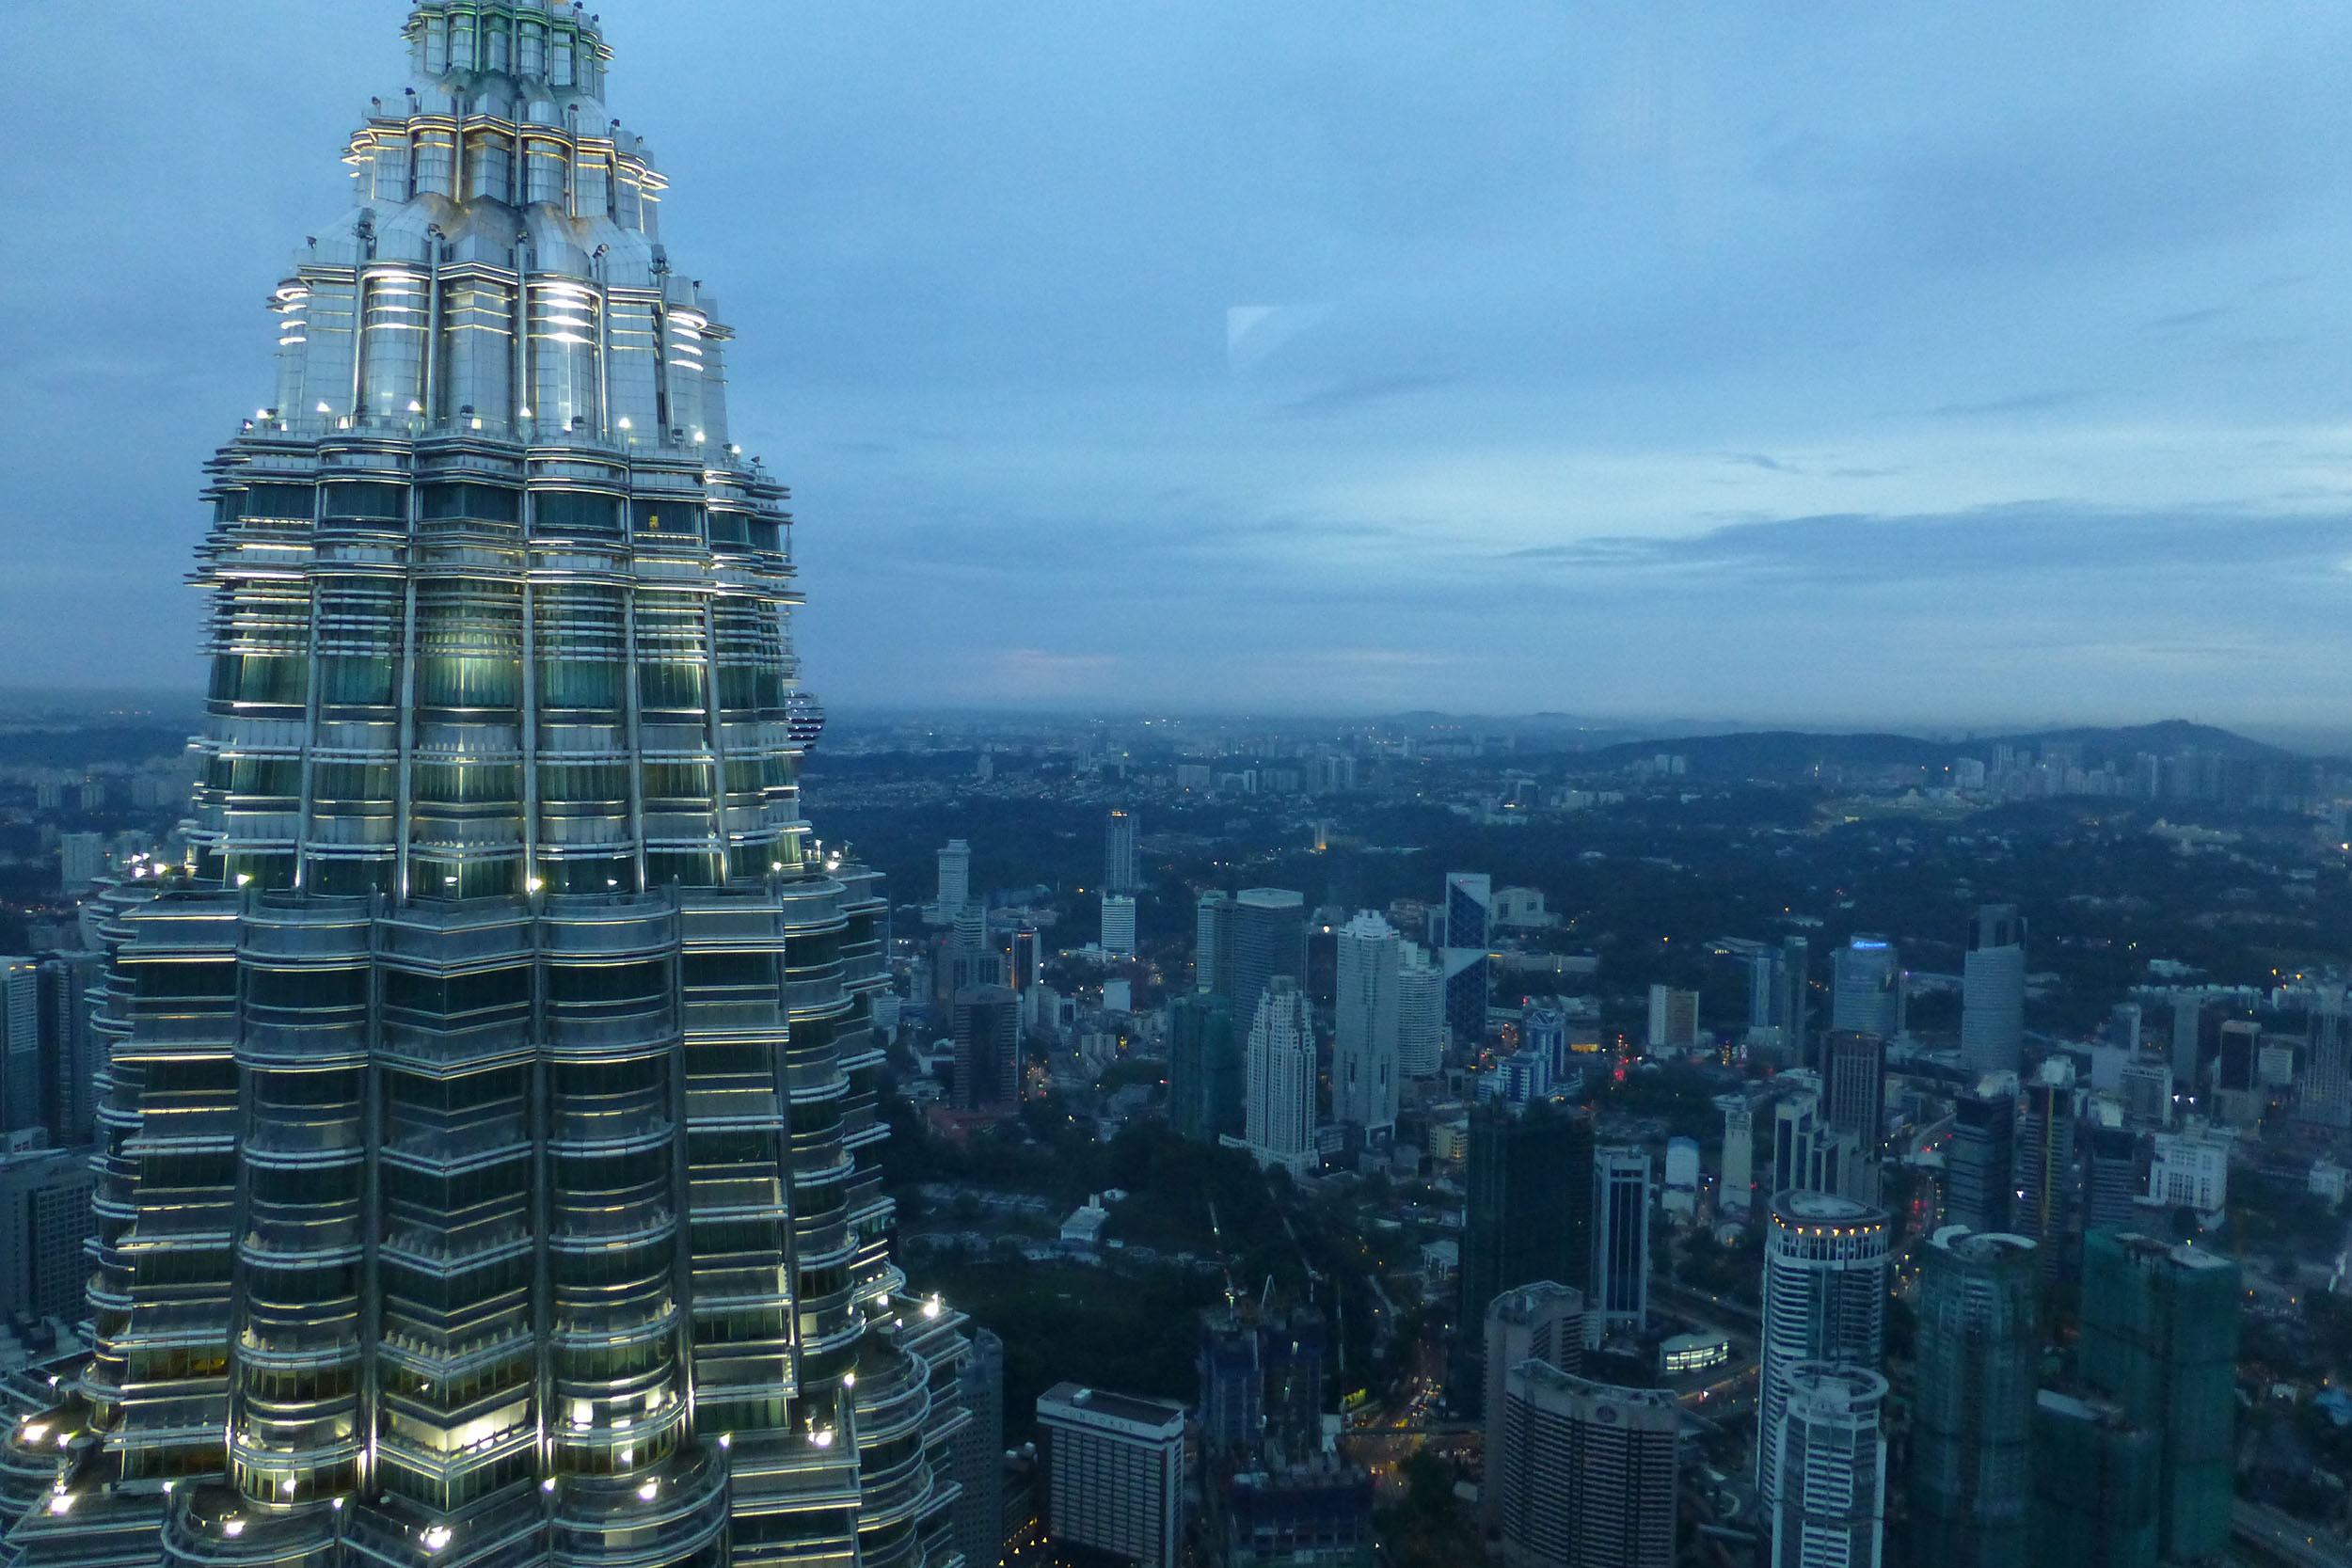 One of the Petronas Towers from the Observation Deck of the other in Kuala Lumpur Malaysia